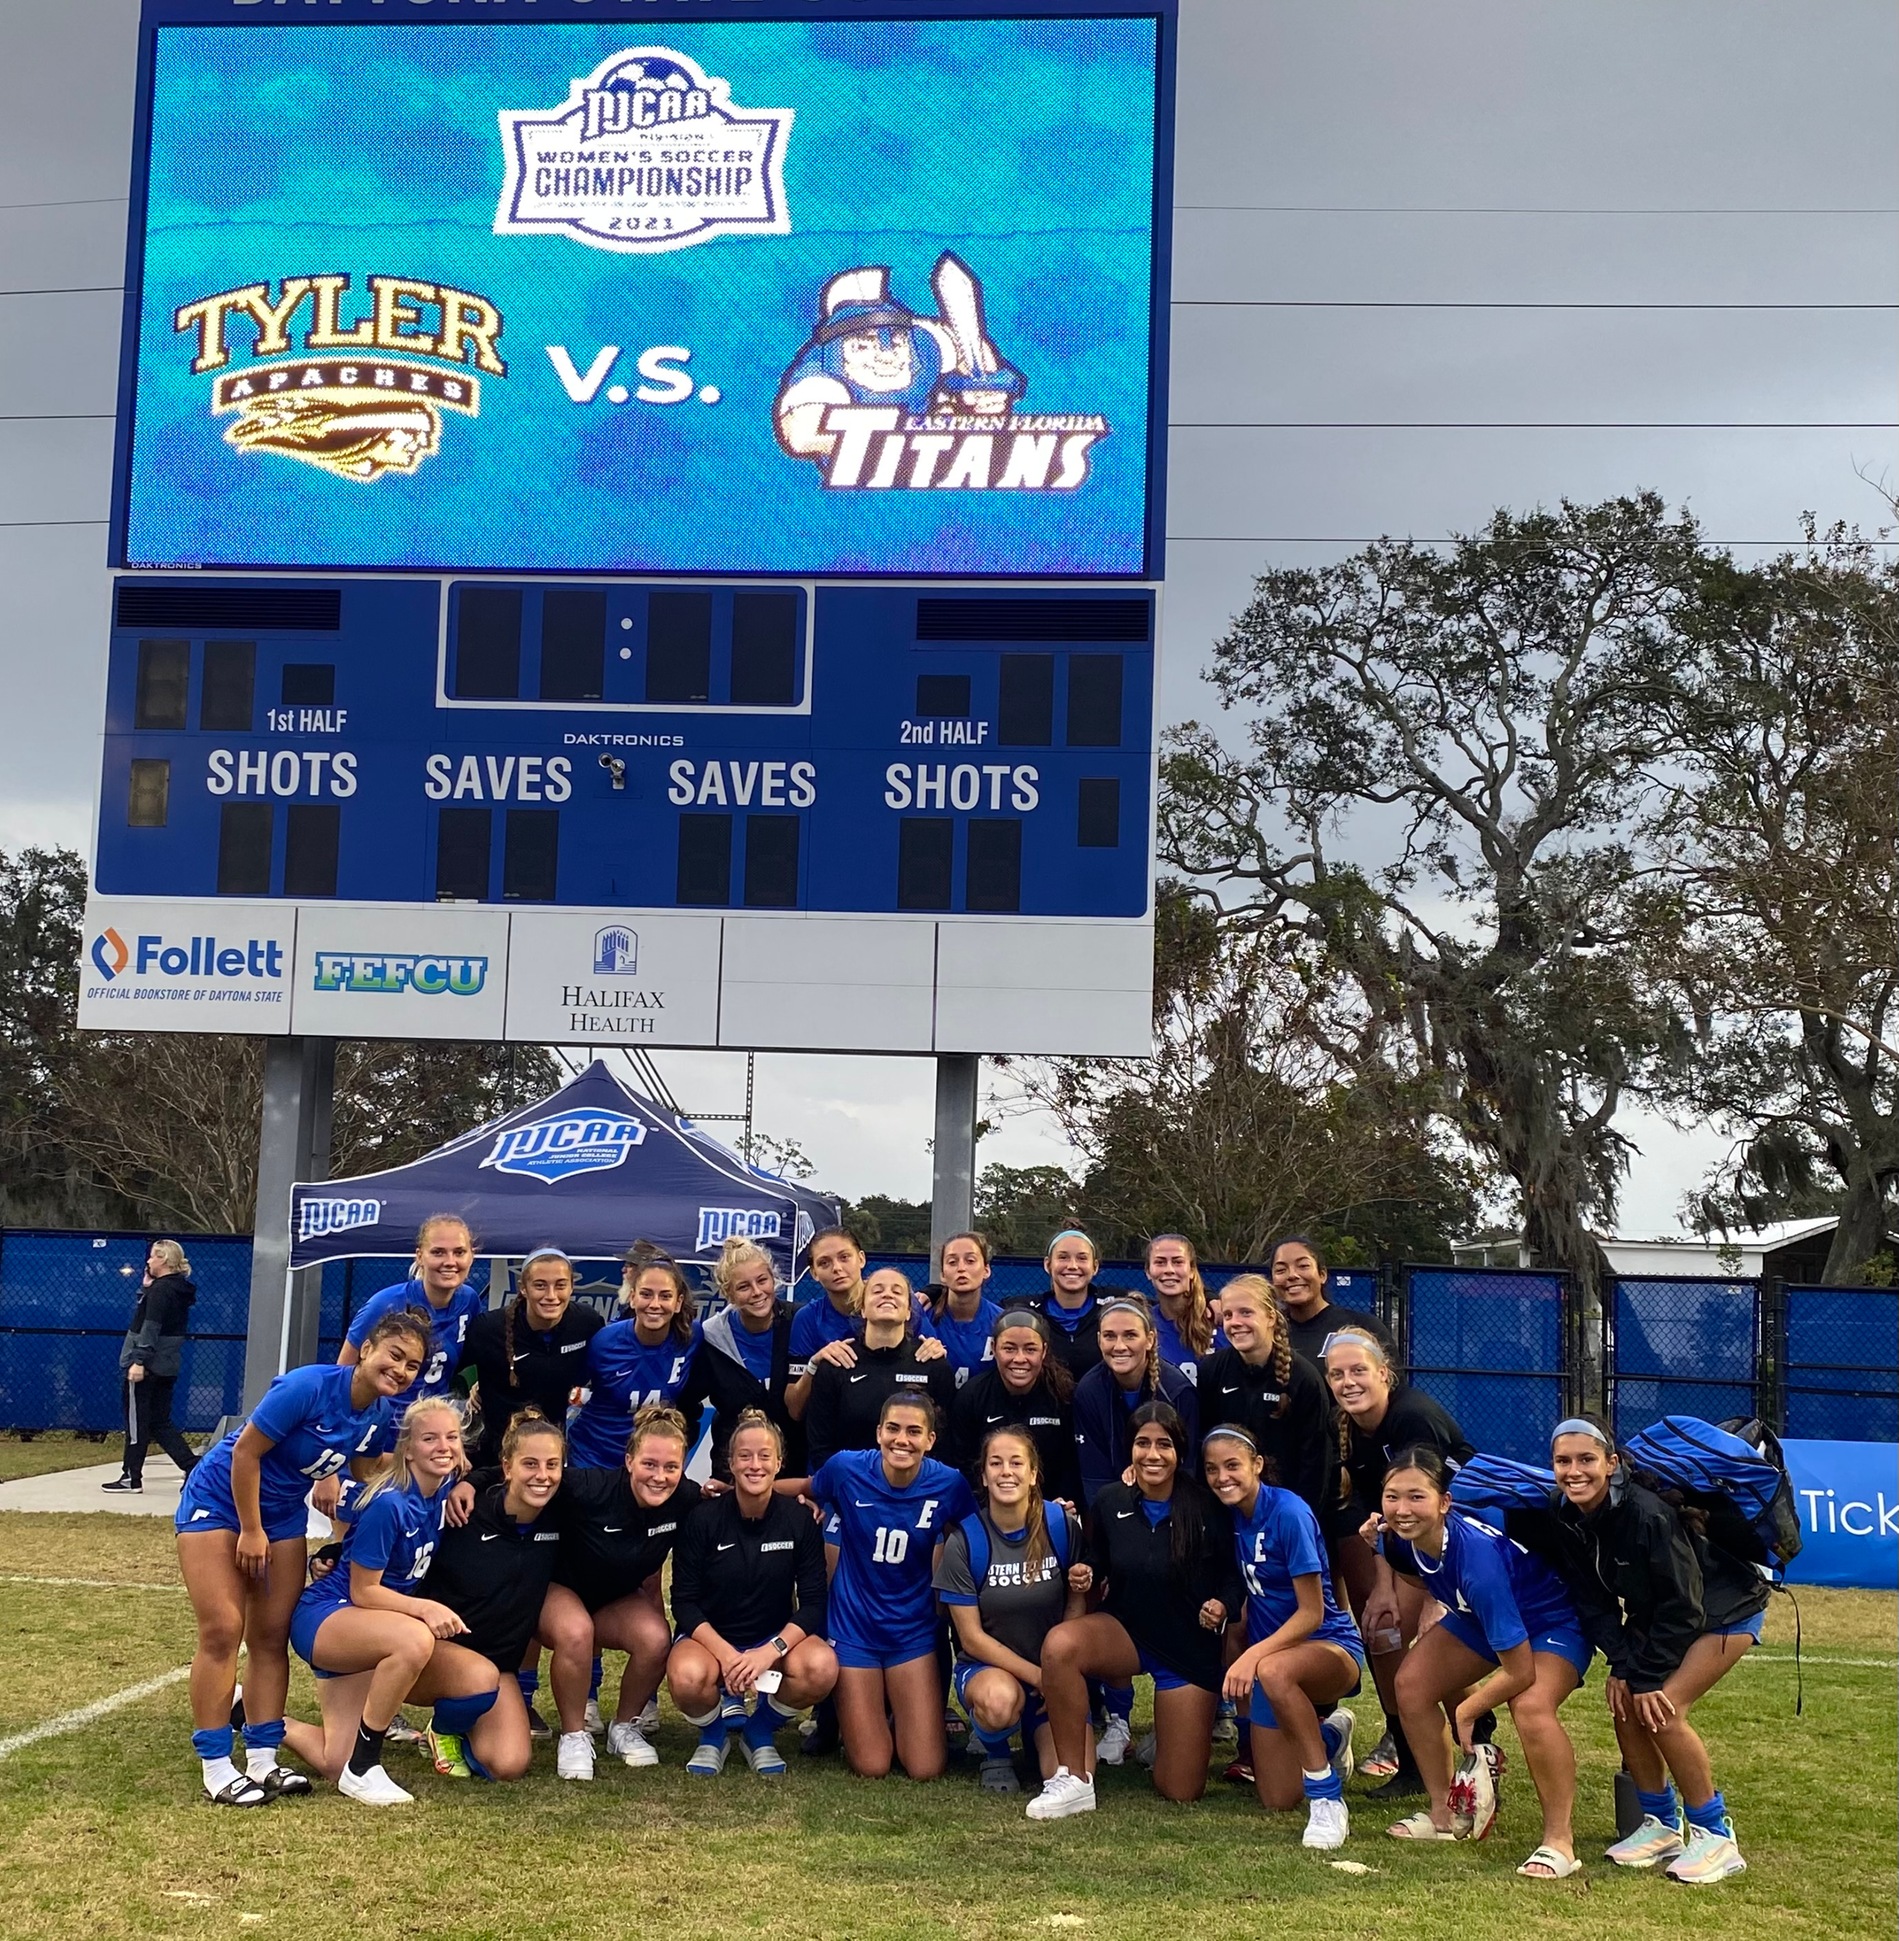 Women's soccer team wins, advances to national championship game on Saturday